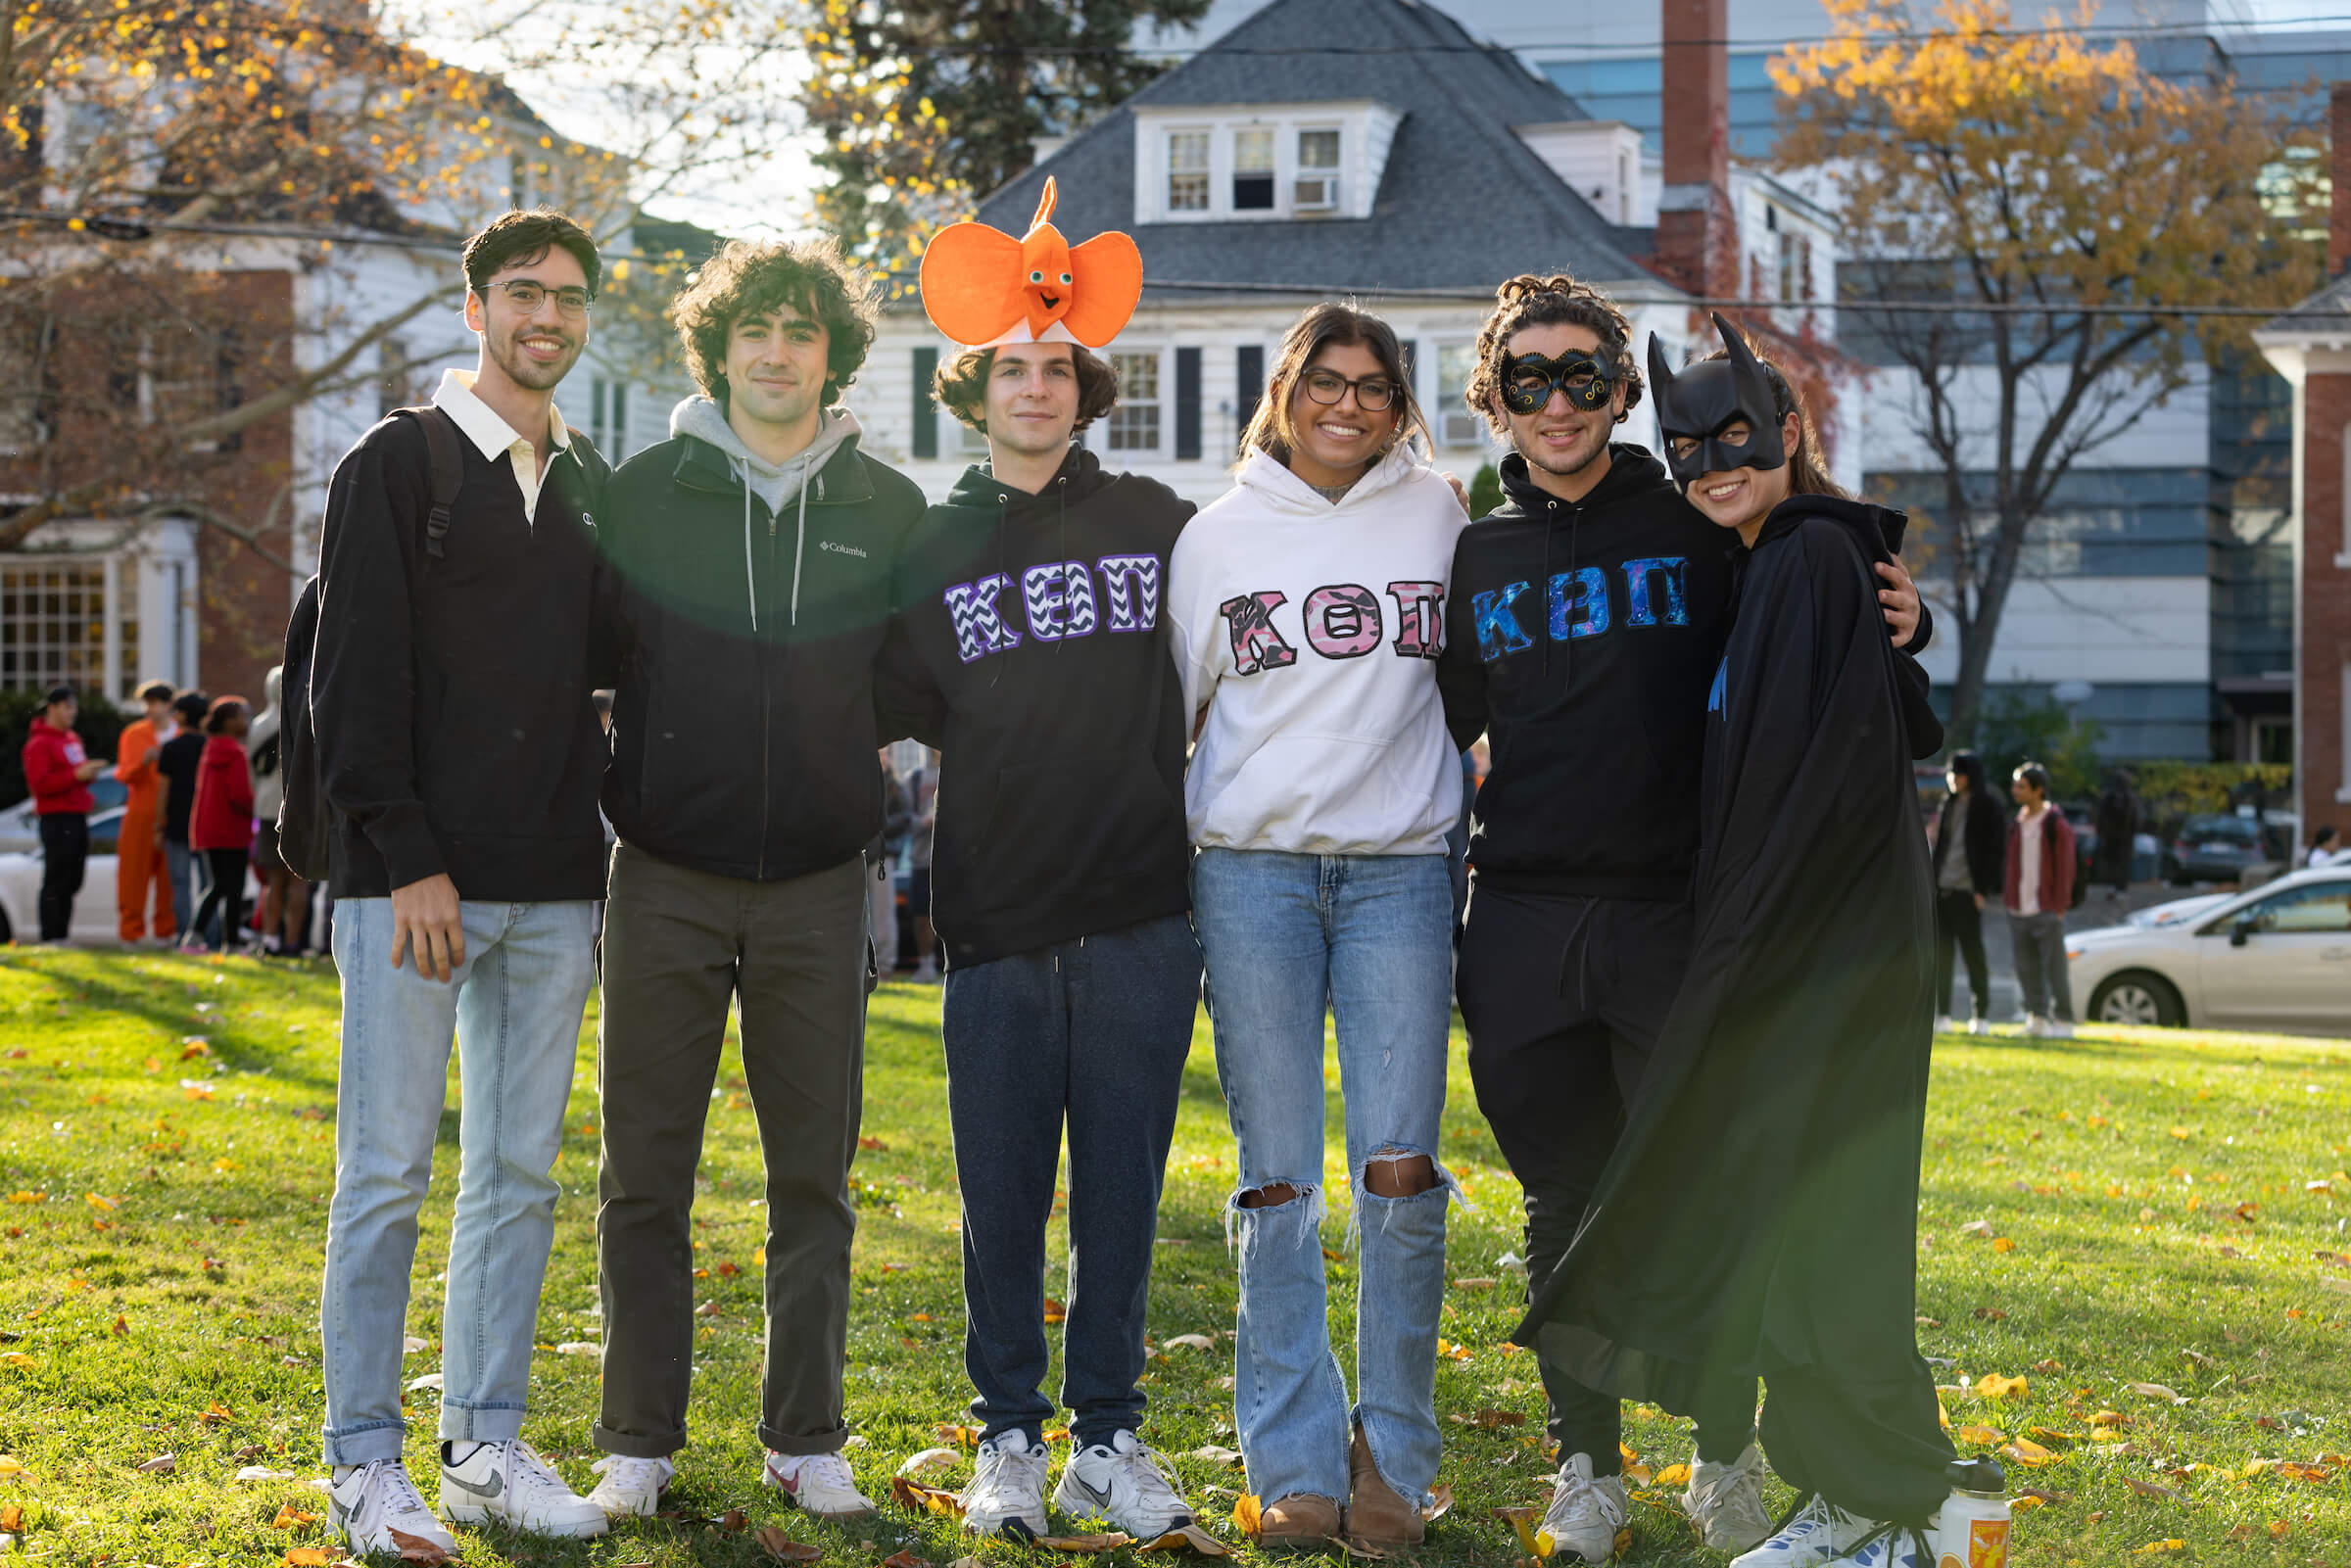 Student members of campus Greek life, some wearing their letters and some wearing Halloween hats and masks, stand together for a photo at the annual Greek or Treat event.